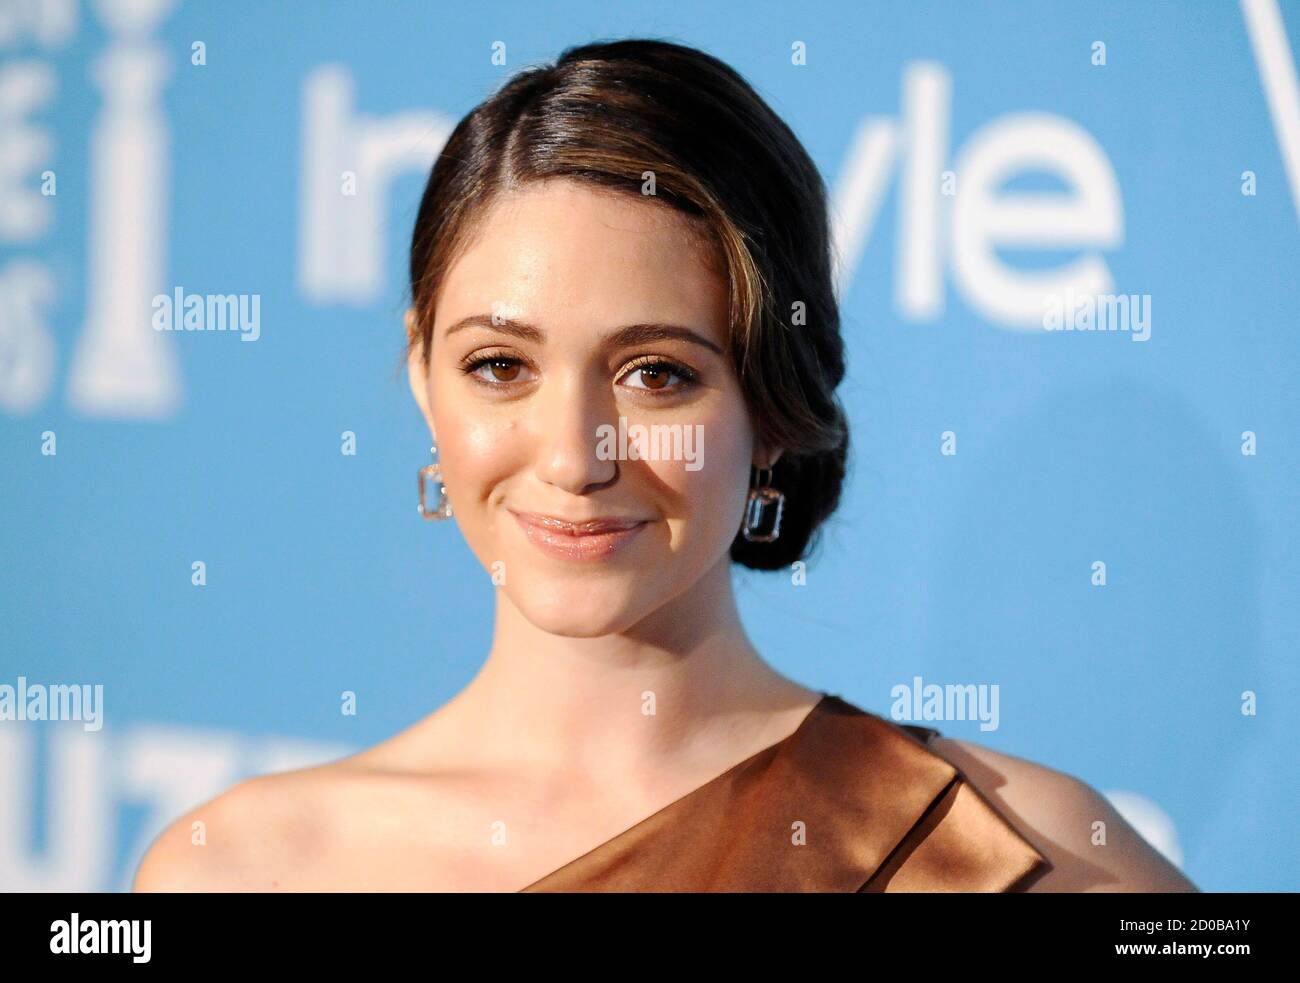 Actress Emmy Rossum arrives at the Hollywood Foreign Press Association's 'A Night of Firsts' in celebration of the 2012 Golden Globe Award Season in West Hollywood, California December 8, 2011. REUTERS/Gus Ruelas (UNITED STATES - Tags: ENTERTAINMENT HEADSHOT) Stock Photo